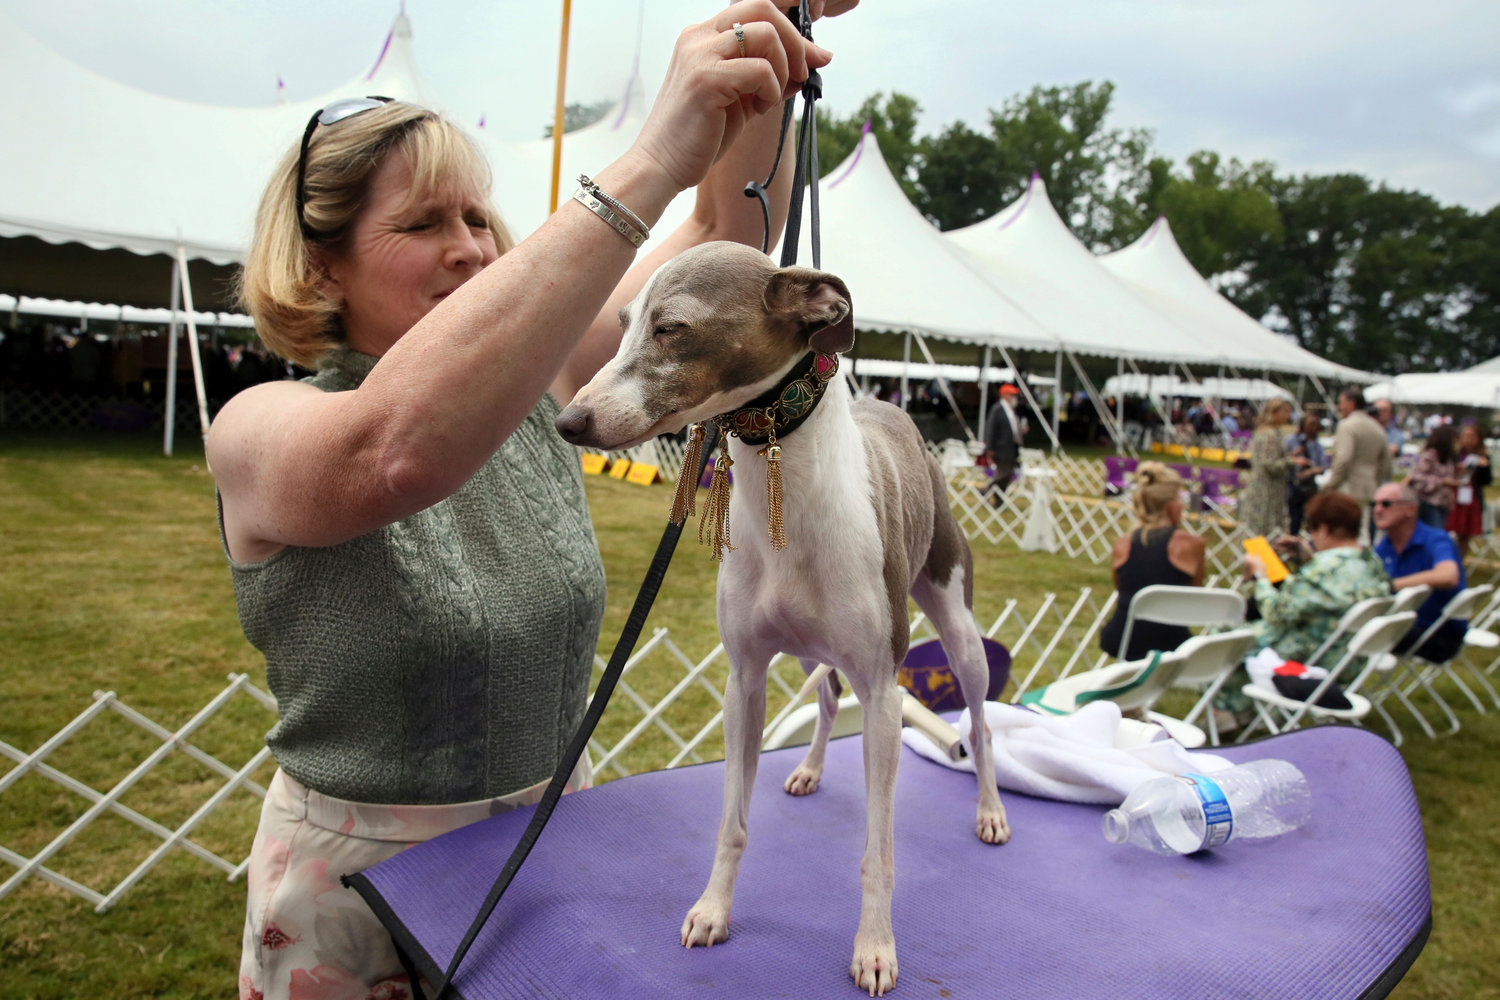 Virginia King Kirby of Pottstown, Pa., grooms an Italian greyhound named Grace Kelly for competition at the Westminster Kennel Club Dog Show, Tuesday, June 21, 2022, in Tarrytown, N.Y.